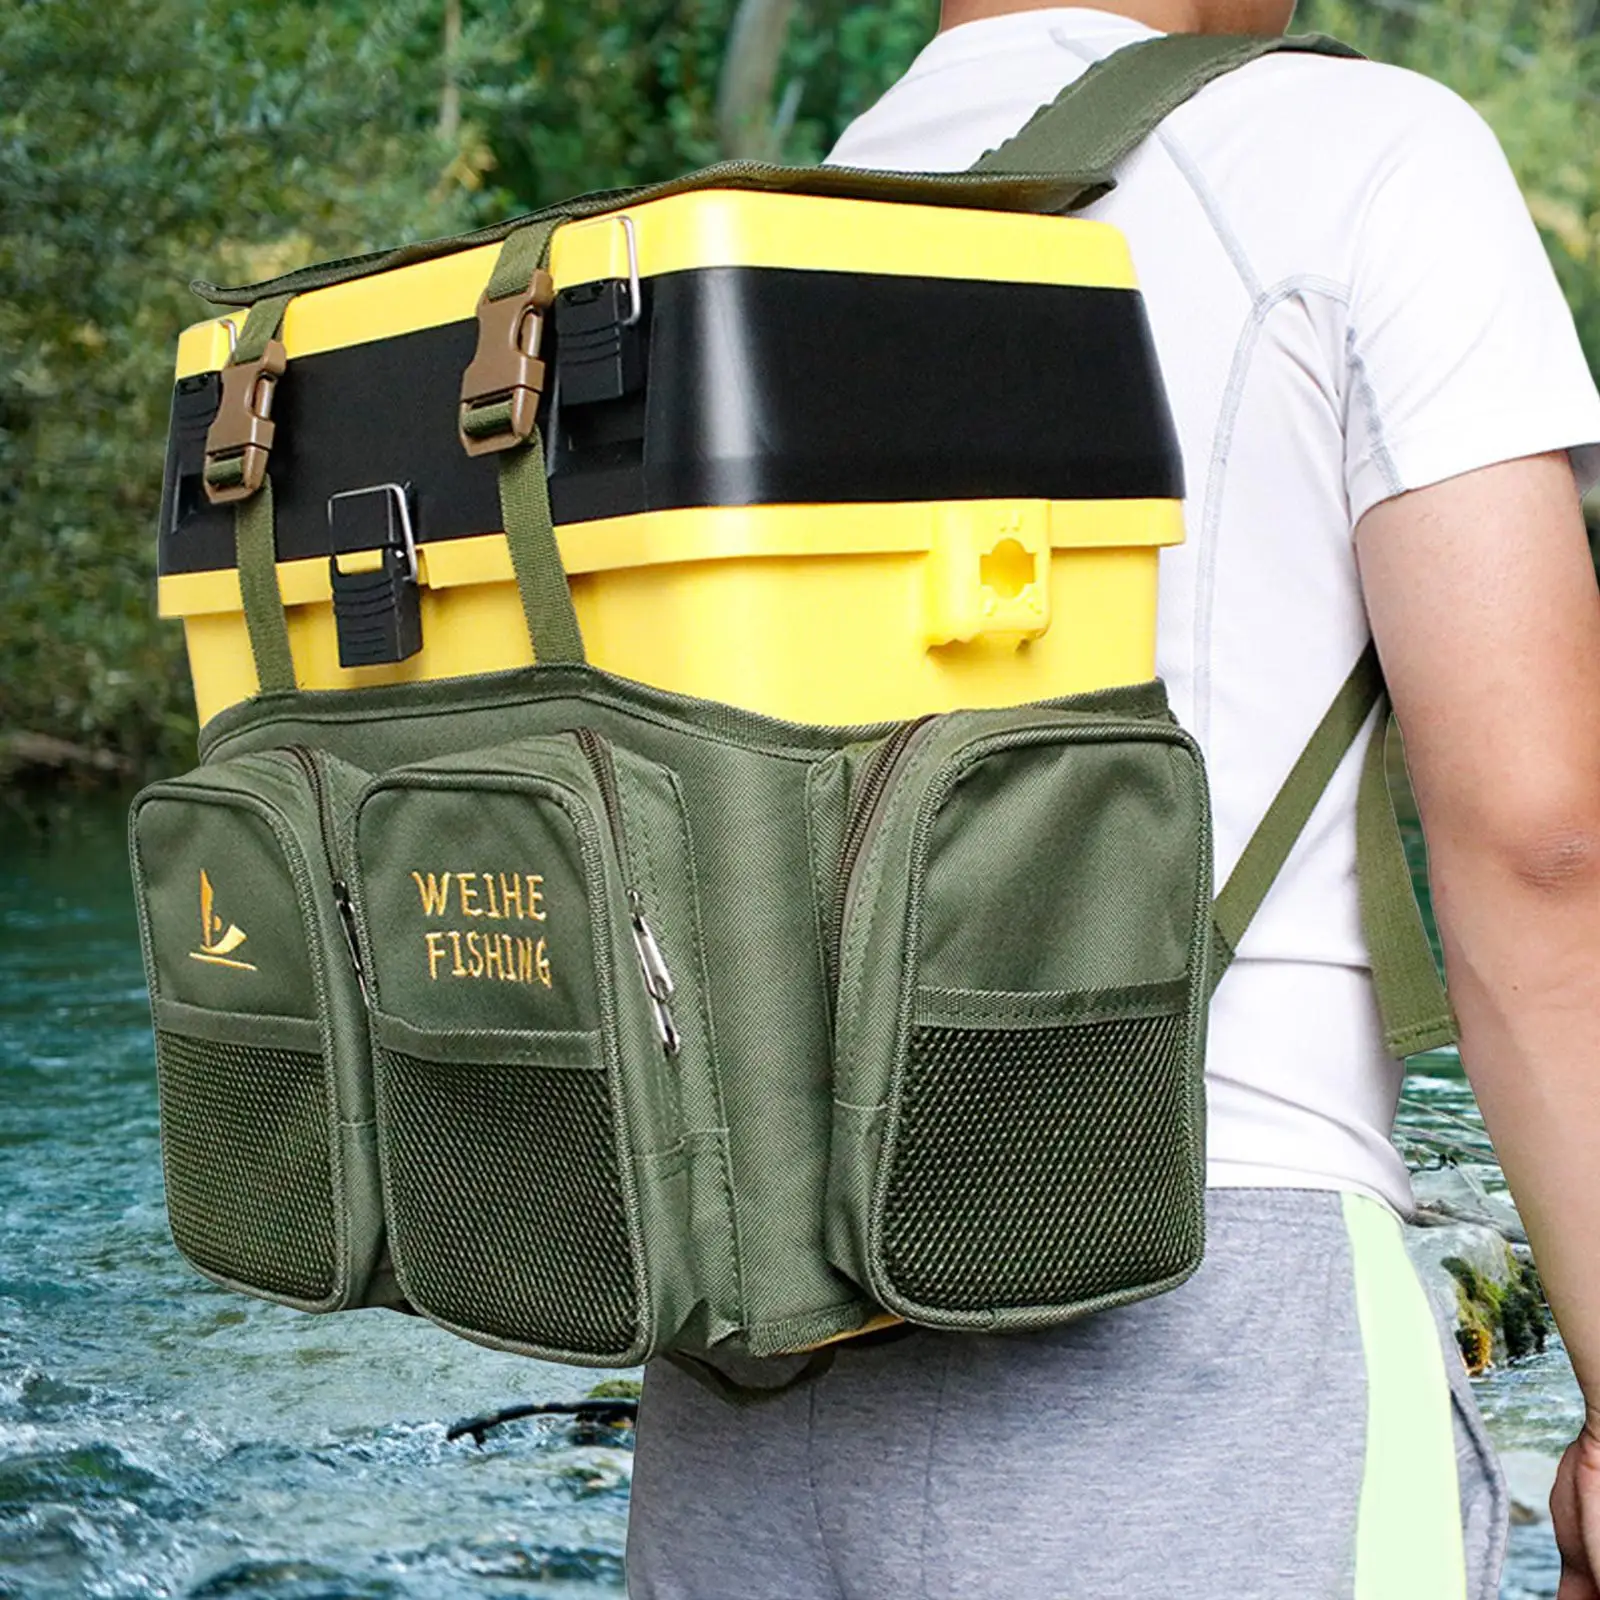 Portable Fishing Tackle Bag Backpack Lure Holder Wear Resistant Organizer Multiple Pockets for Sea Fishing Traveling Camping